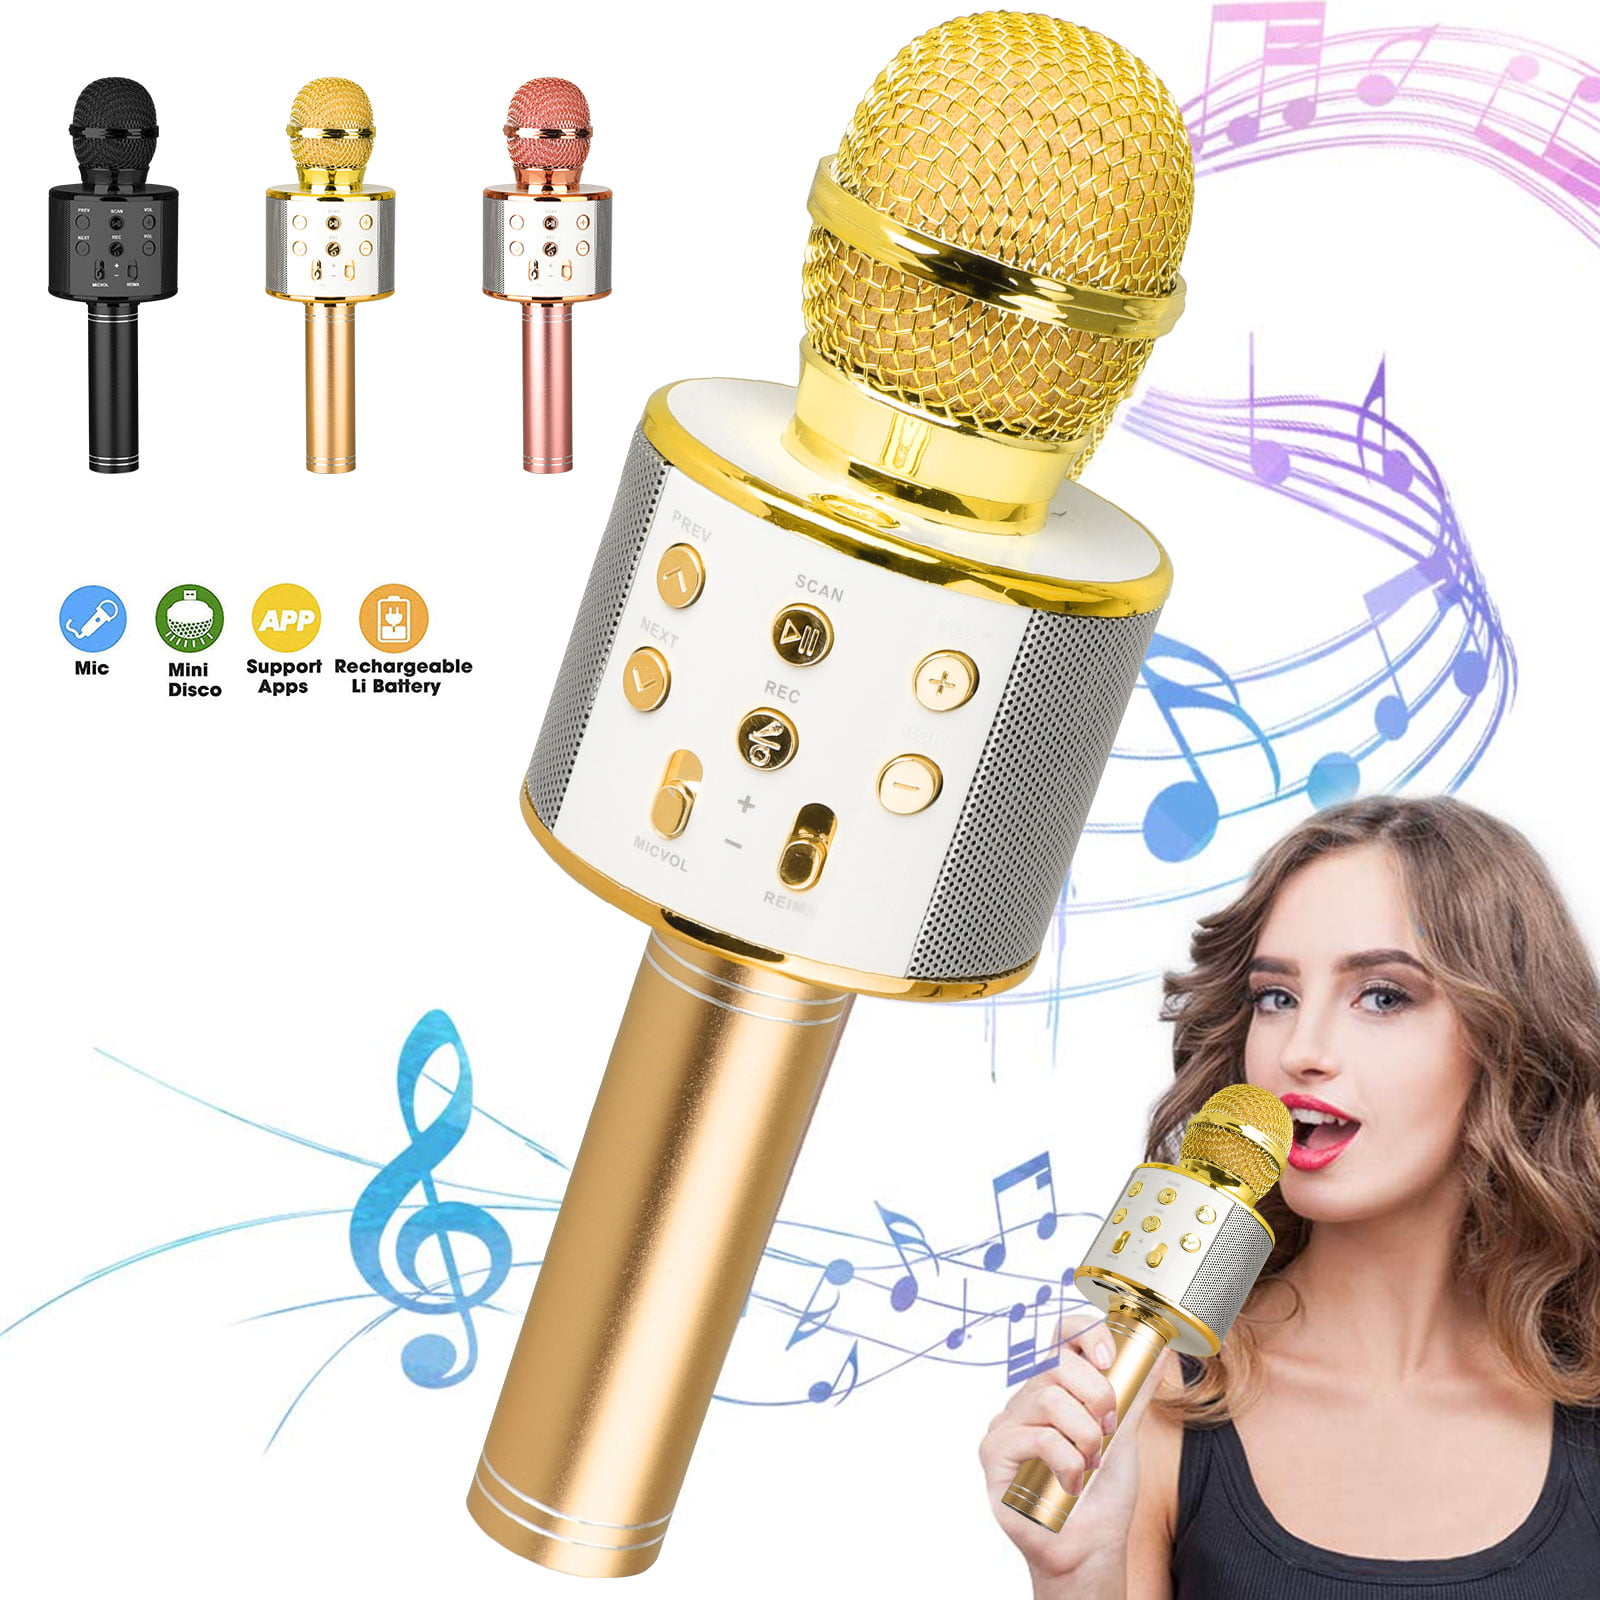 Wireless Bluetooth Karaoke Microphone with Dual Stereo Speaker for Cell Phone Tablet PC Portable Handheld Singing Machine Gifts 2020 Upgraded Rose Gold